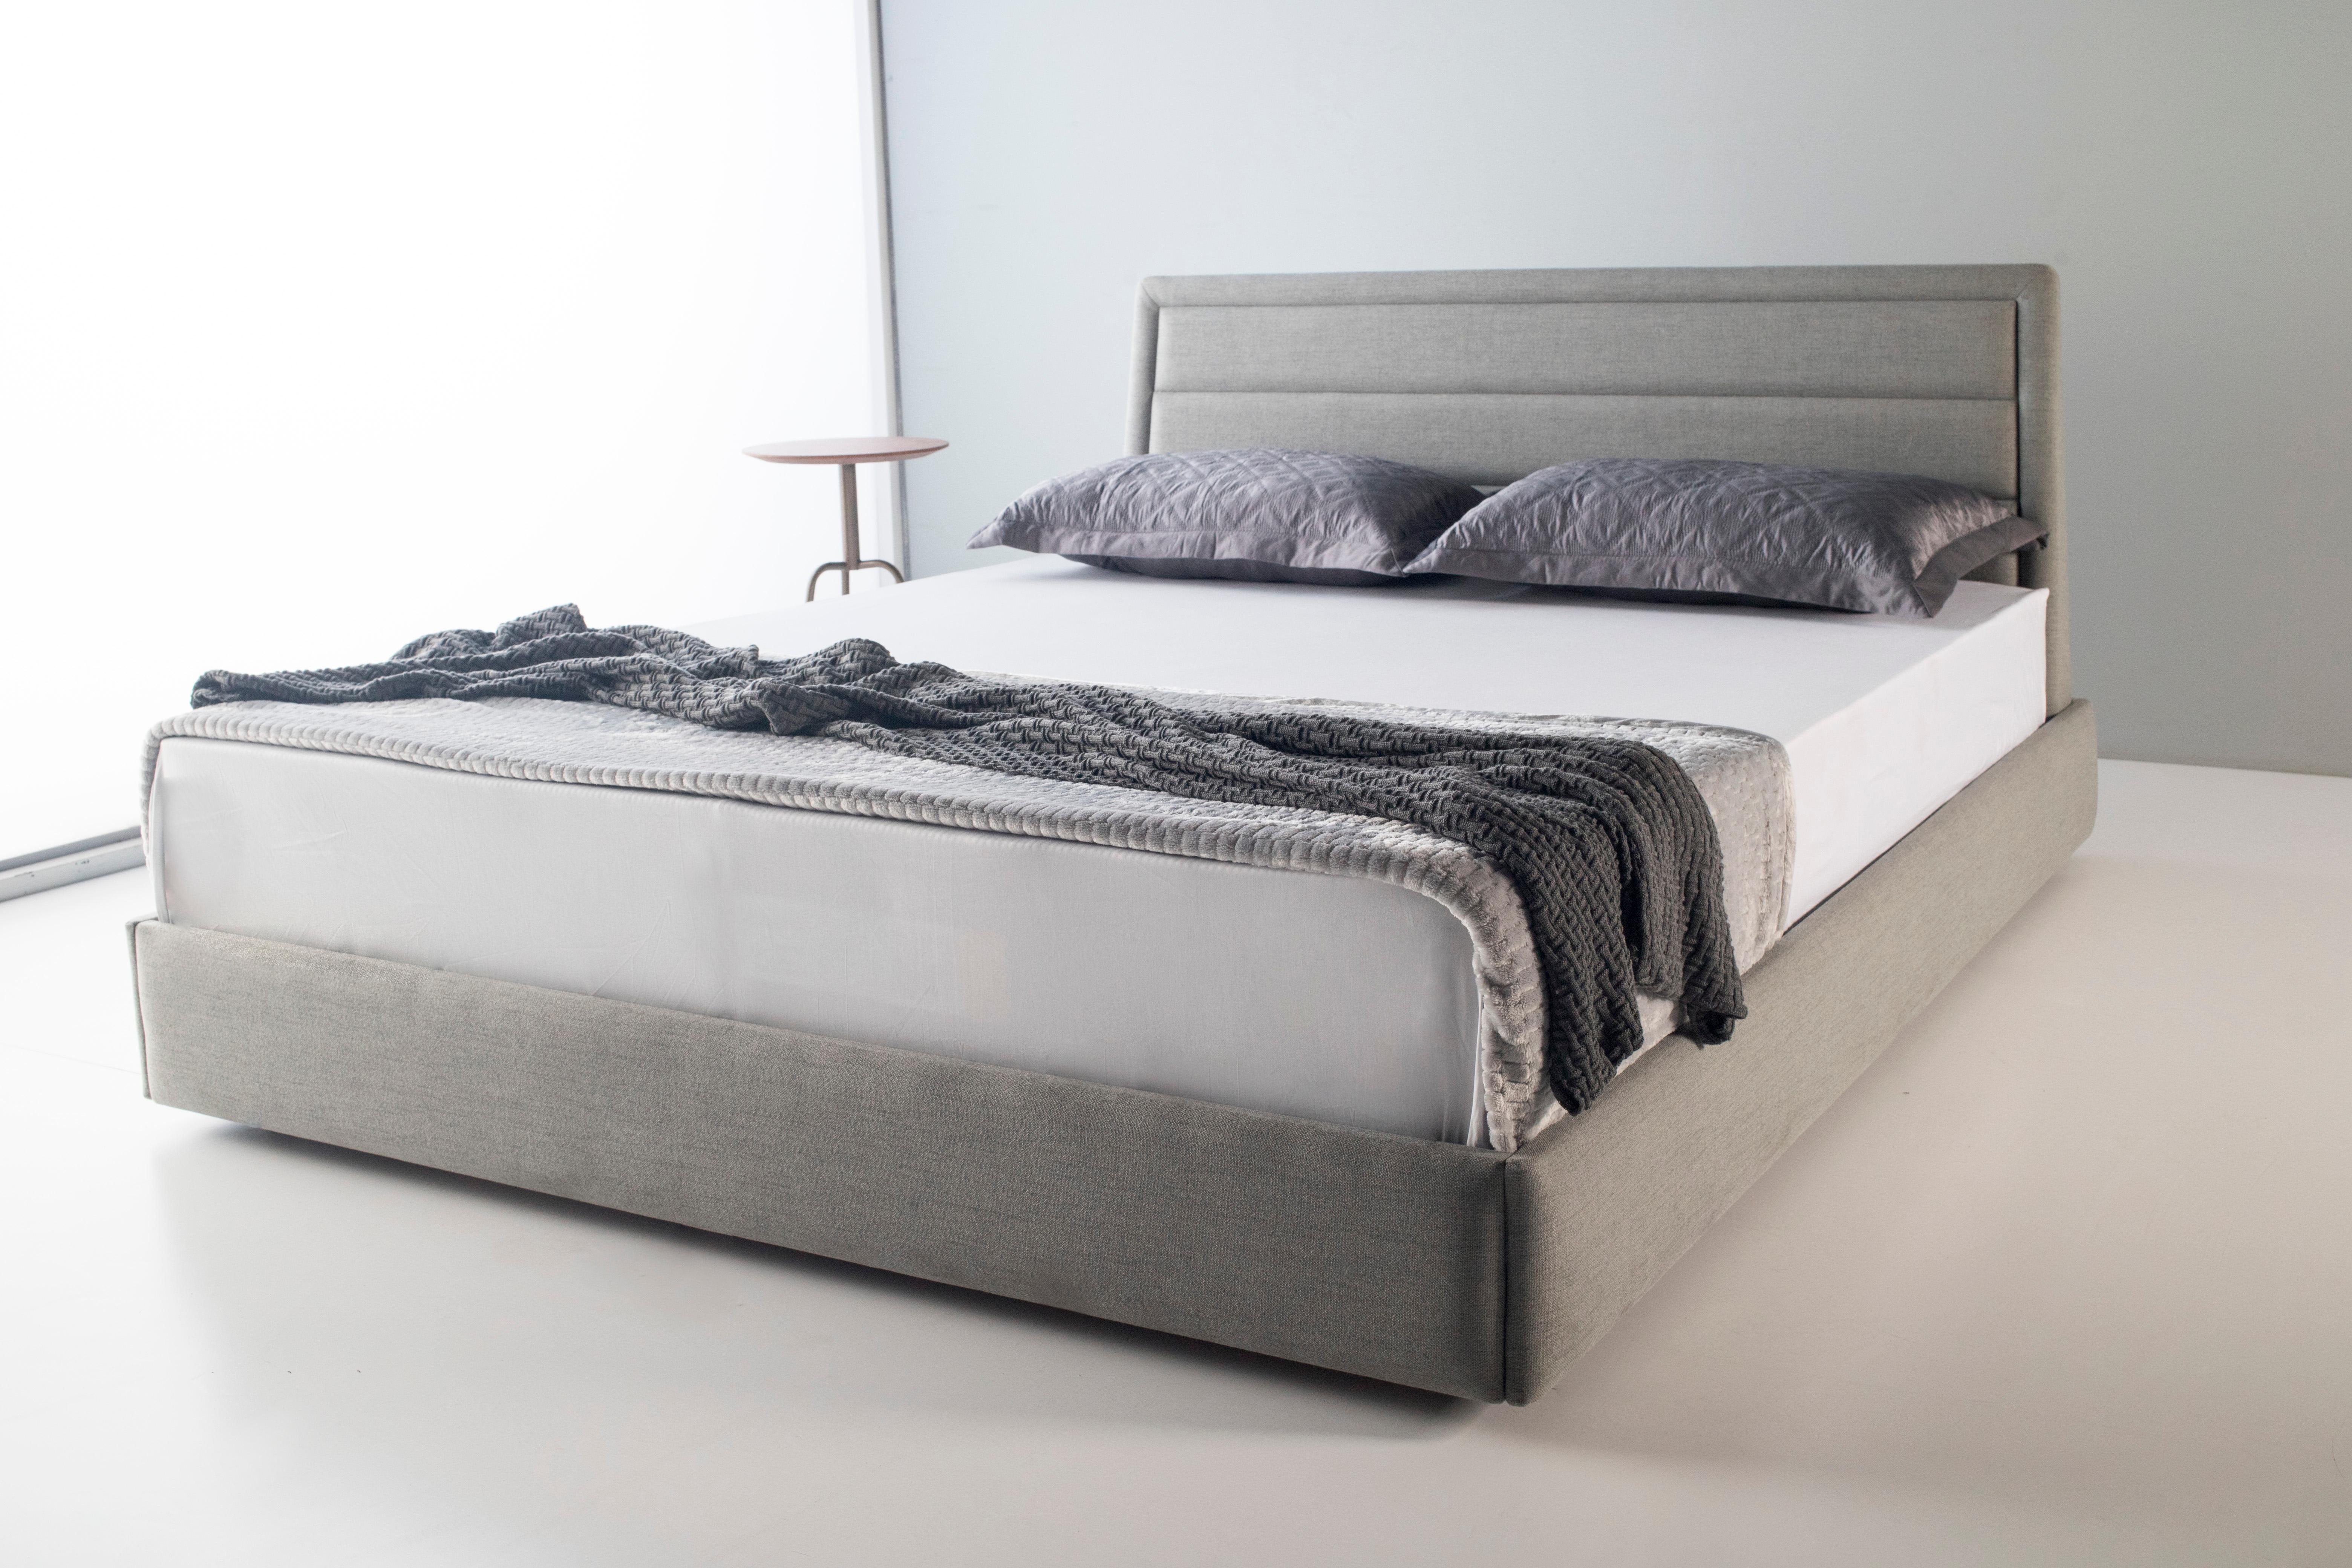 Boss Bed by Doimo Brasil
Dimensions:  W 98 x D 207 x H 98 cm 
Materials: Structure: Fabric, Internal headboard: Fabric. 
 
Also available in W 148 x D 207 x H 98, W 168 x D 217 x H 98, W 203 x D 222x H98 cm. Please contact us. 

With the intention